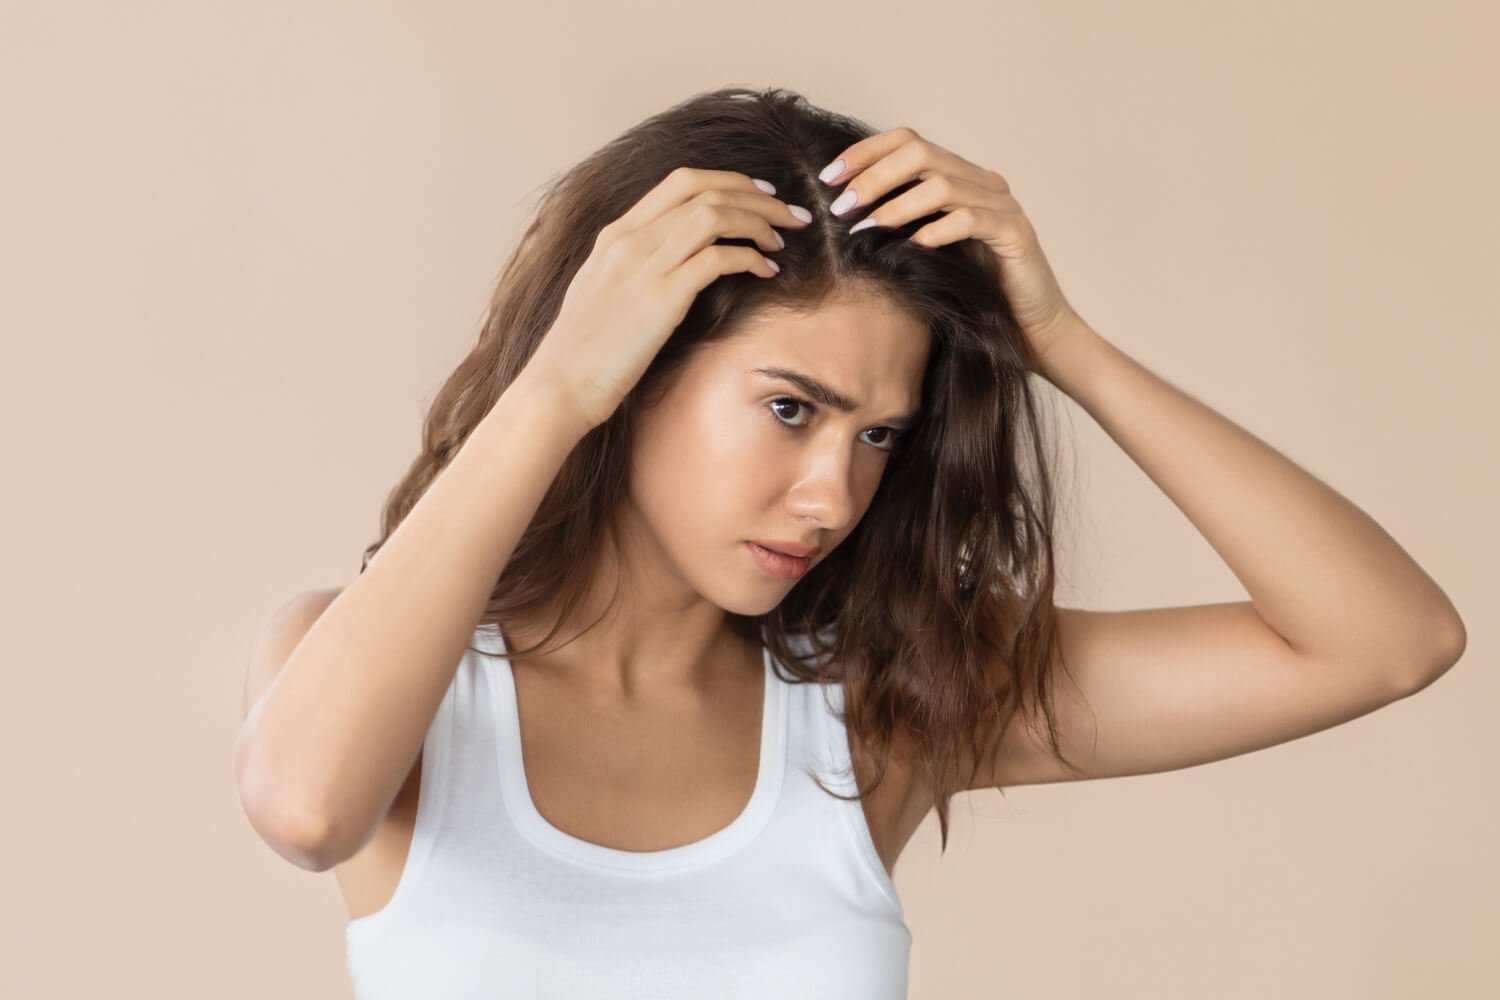 Try These Shampoos to Treat Dandruff & Itchy Scalp